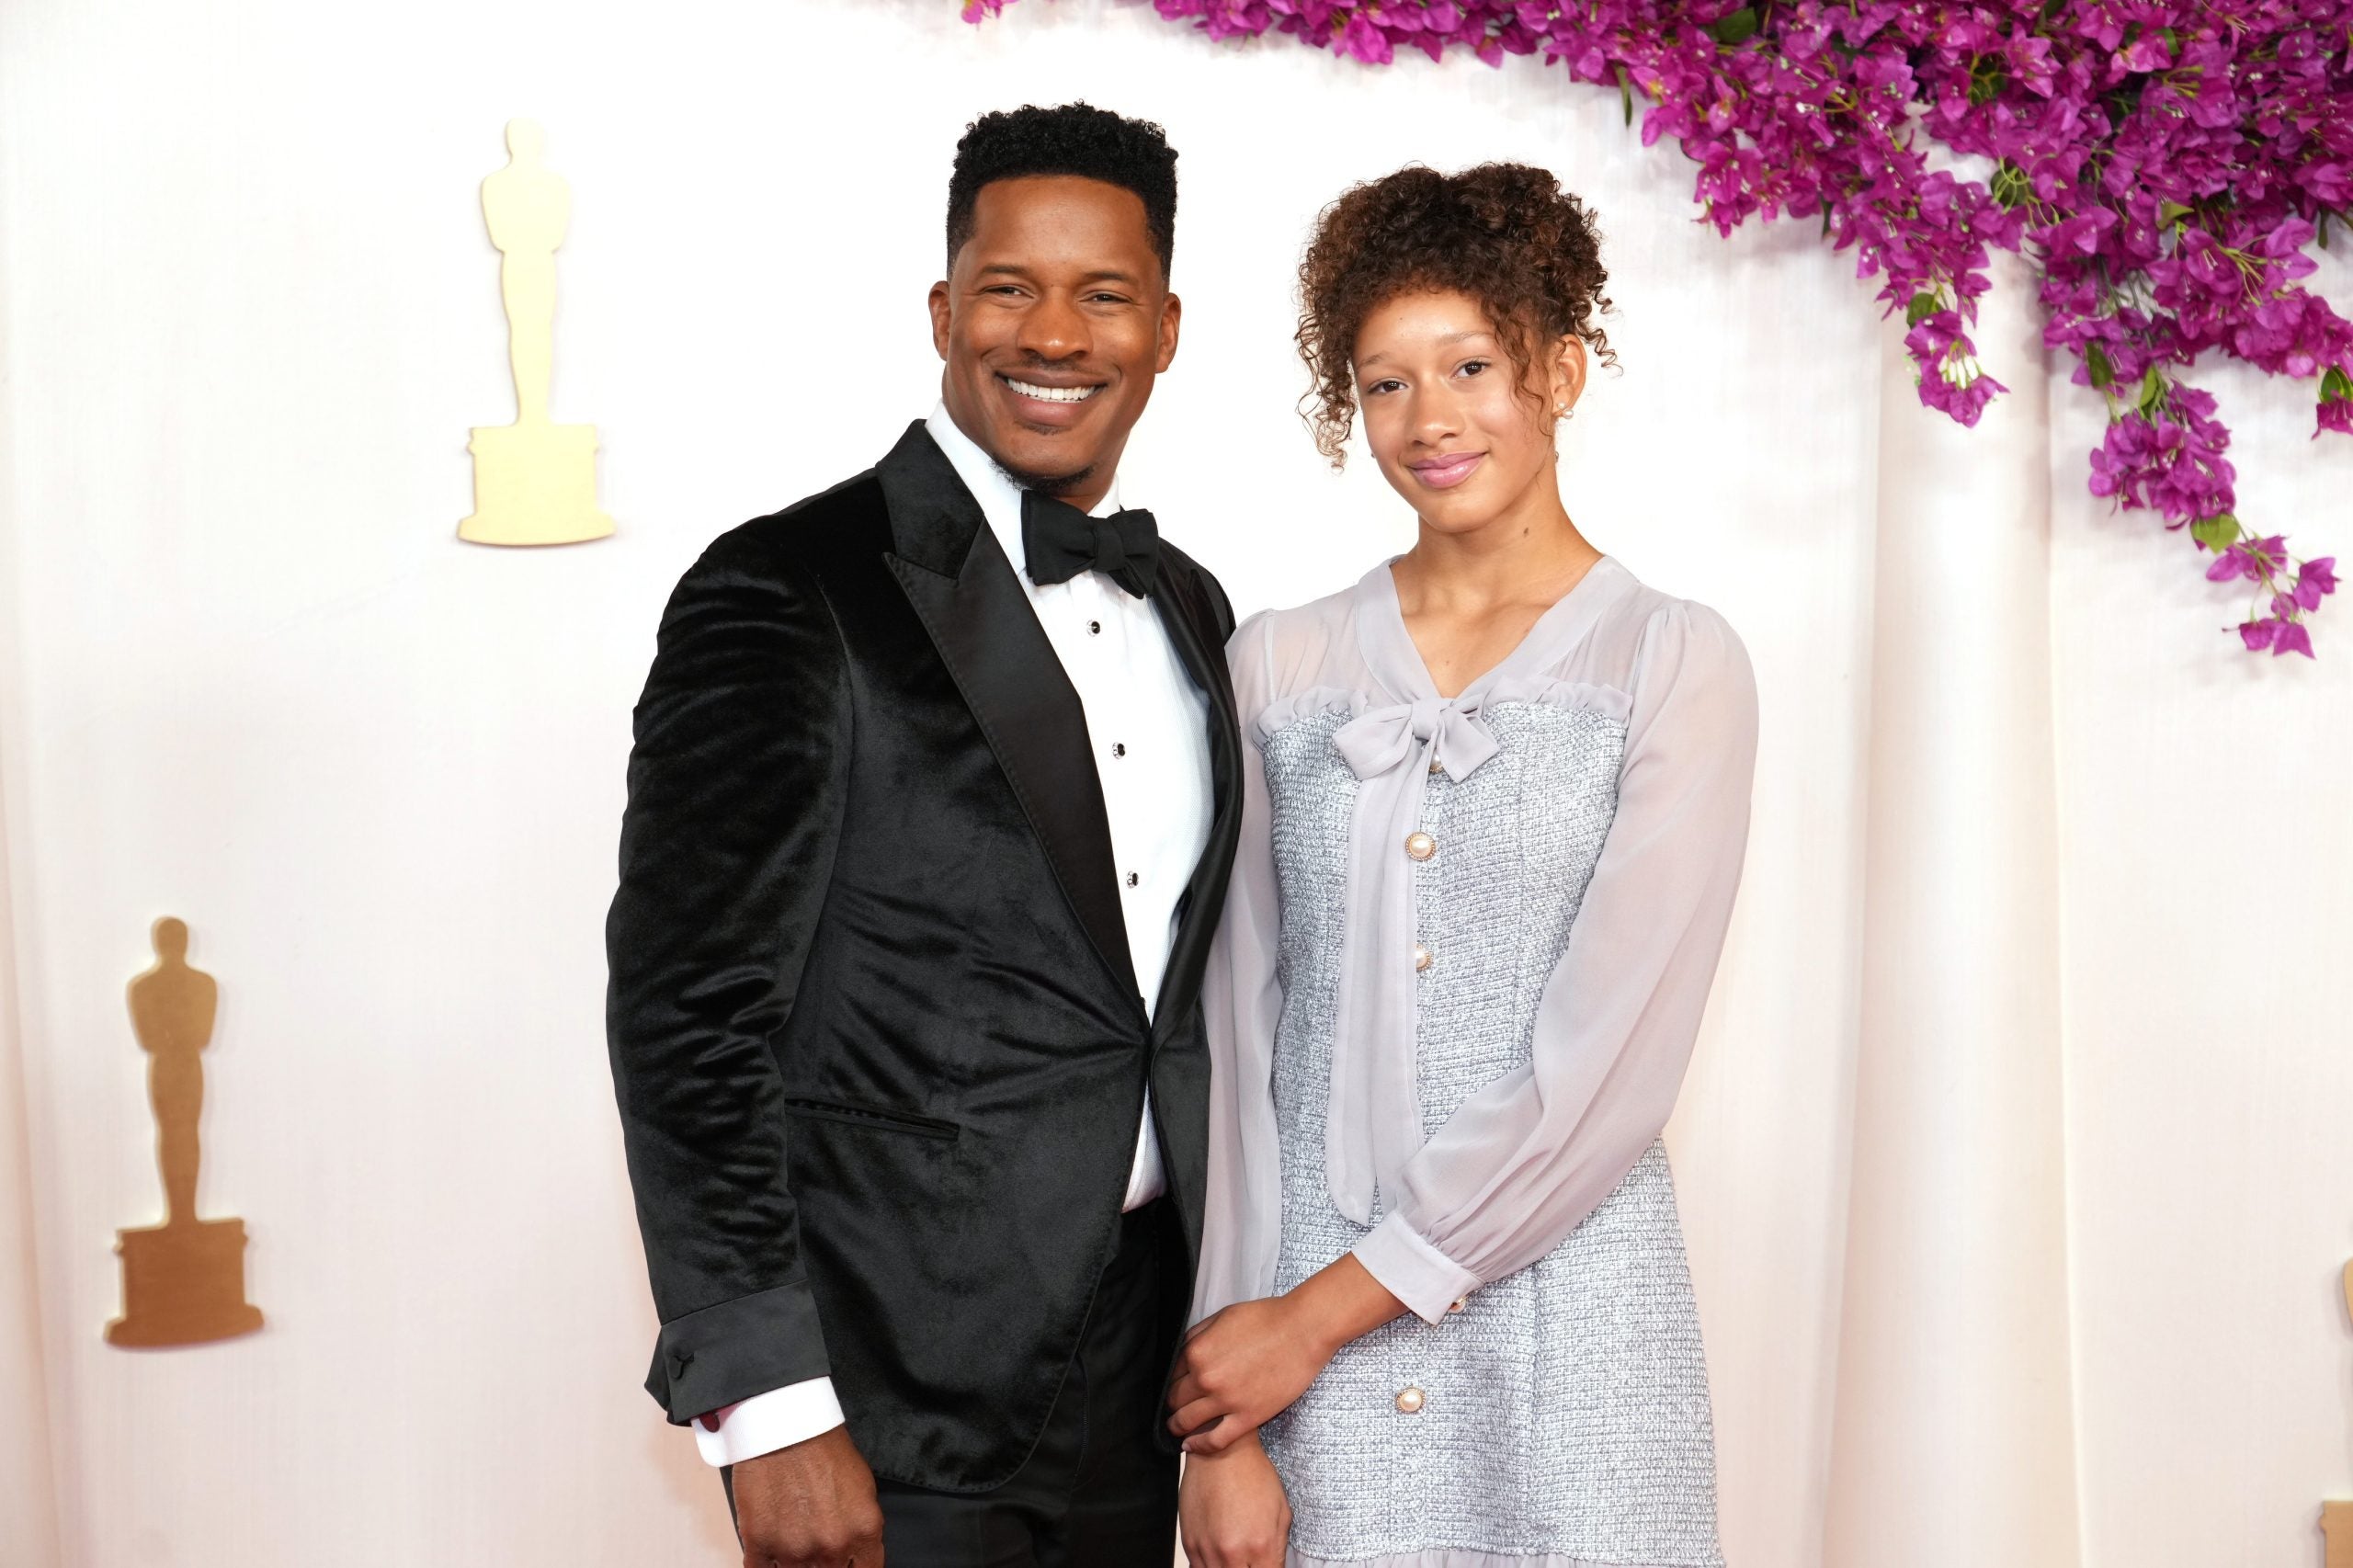 Black Men Brought Their Daughters To The Oscars And It's Giving Us All The Feels